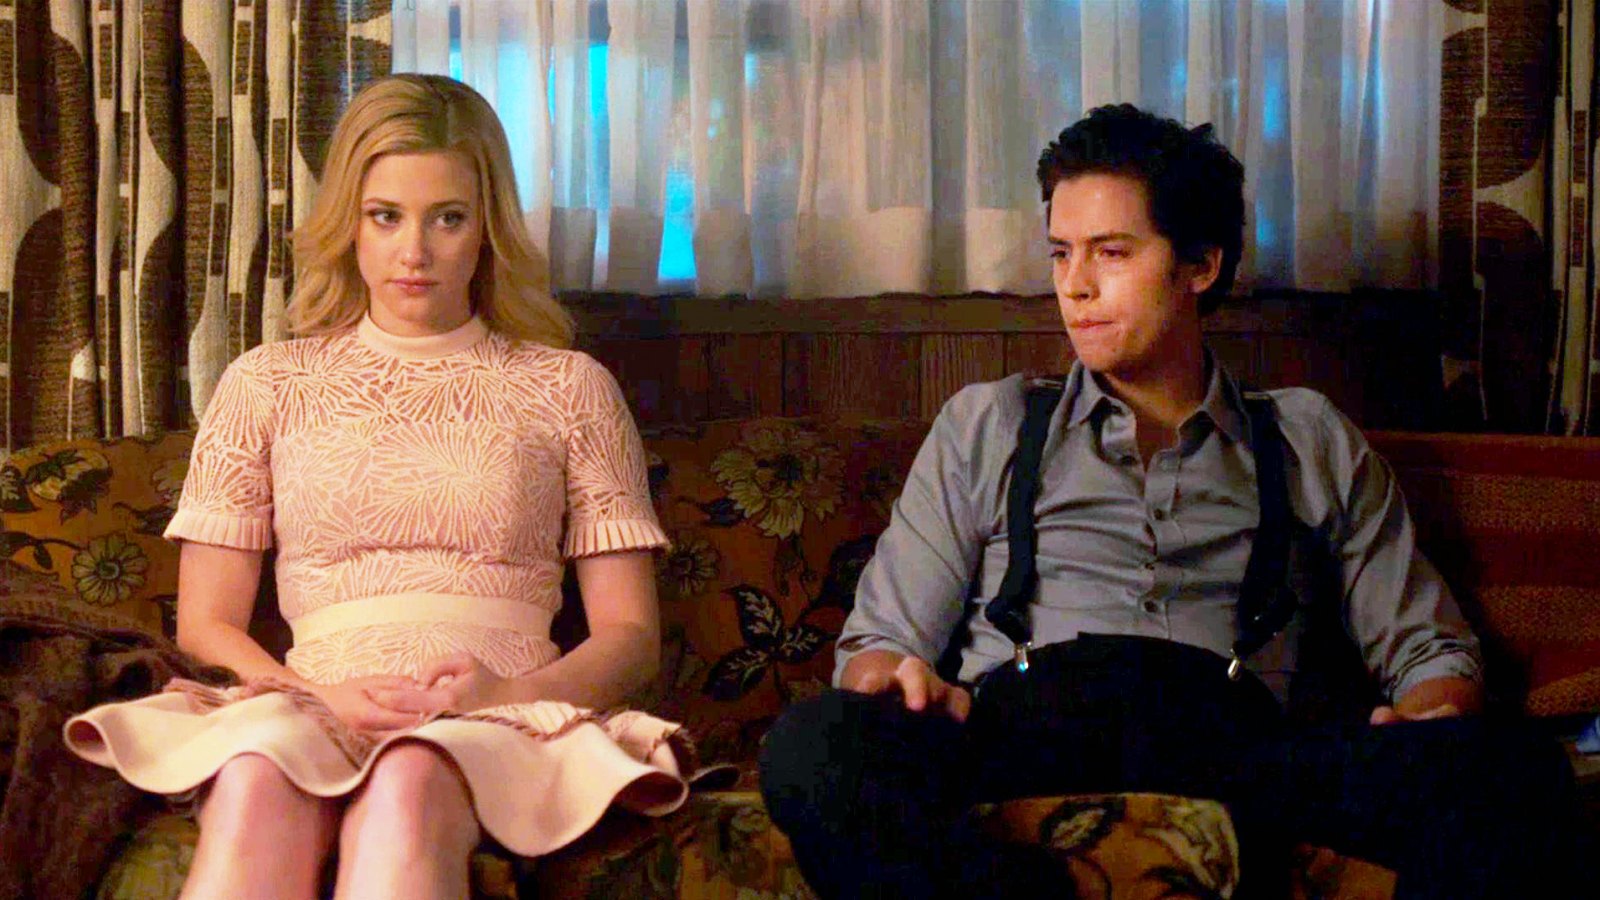 Lili Reinhart as Betty and Cole Sprouse as Jughead in ‘Riverdale‘